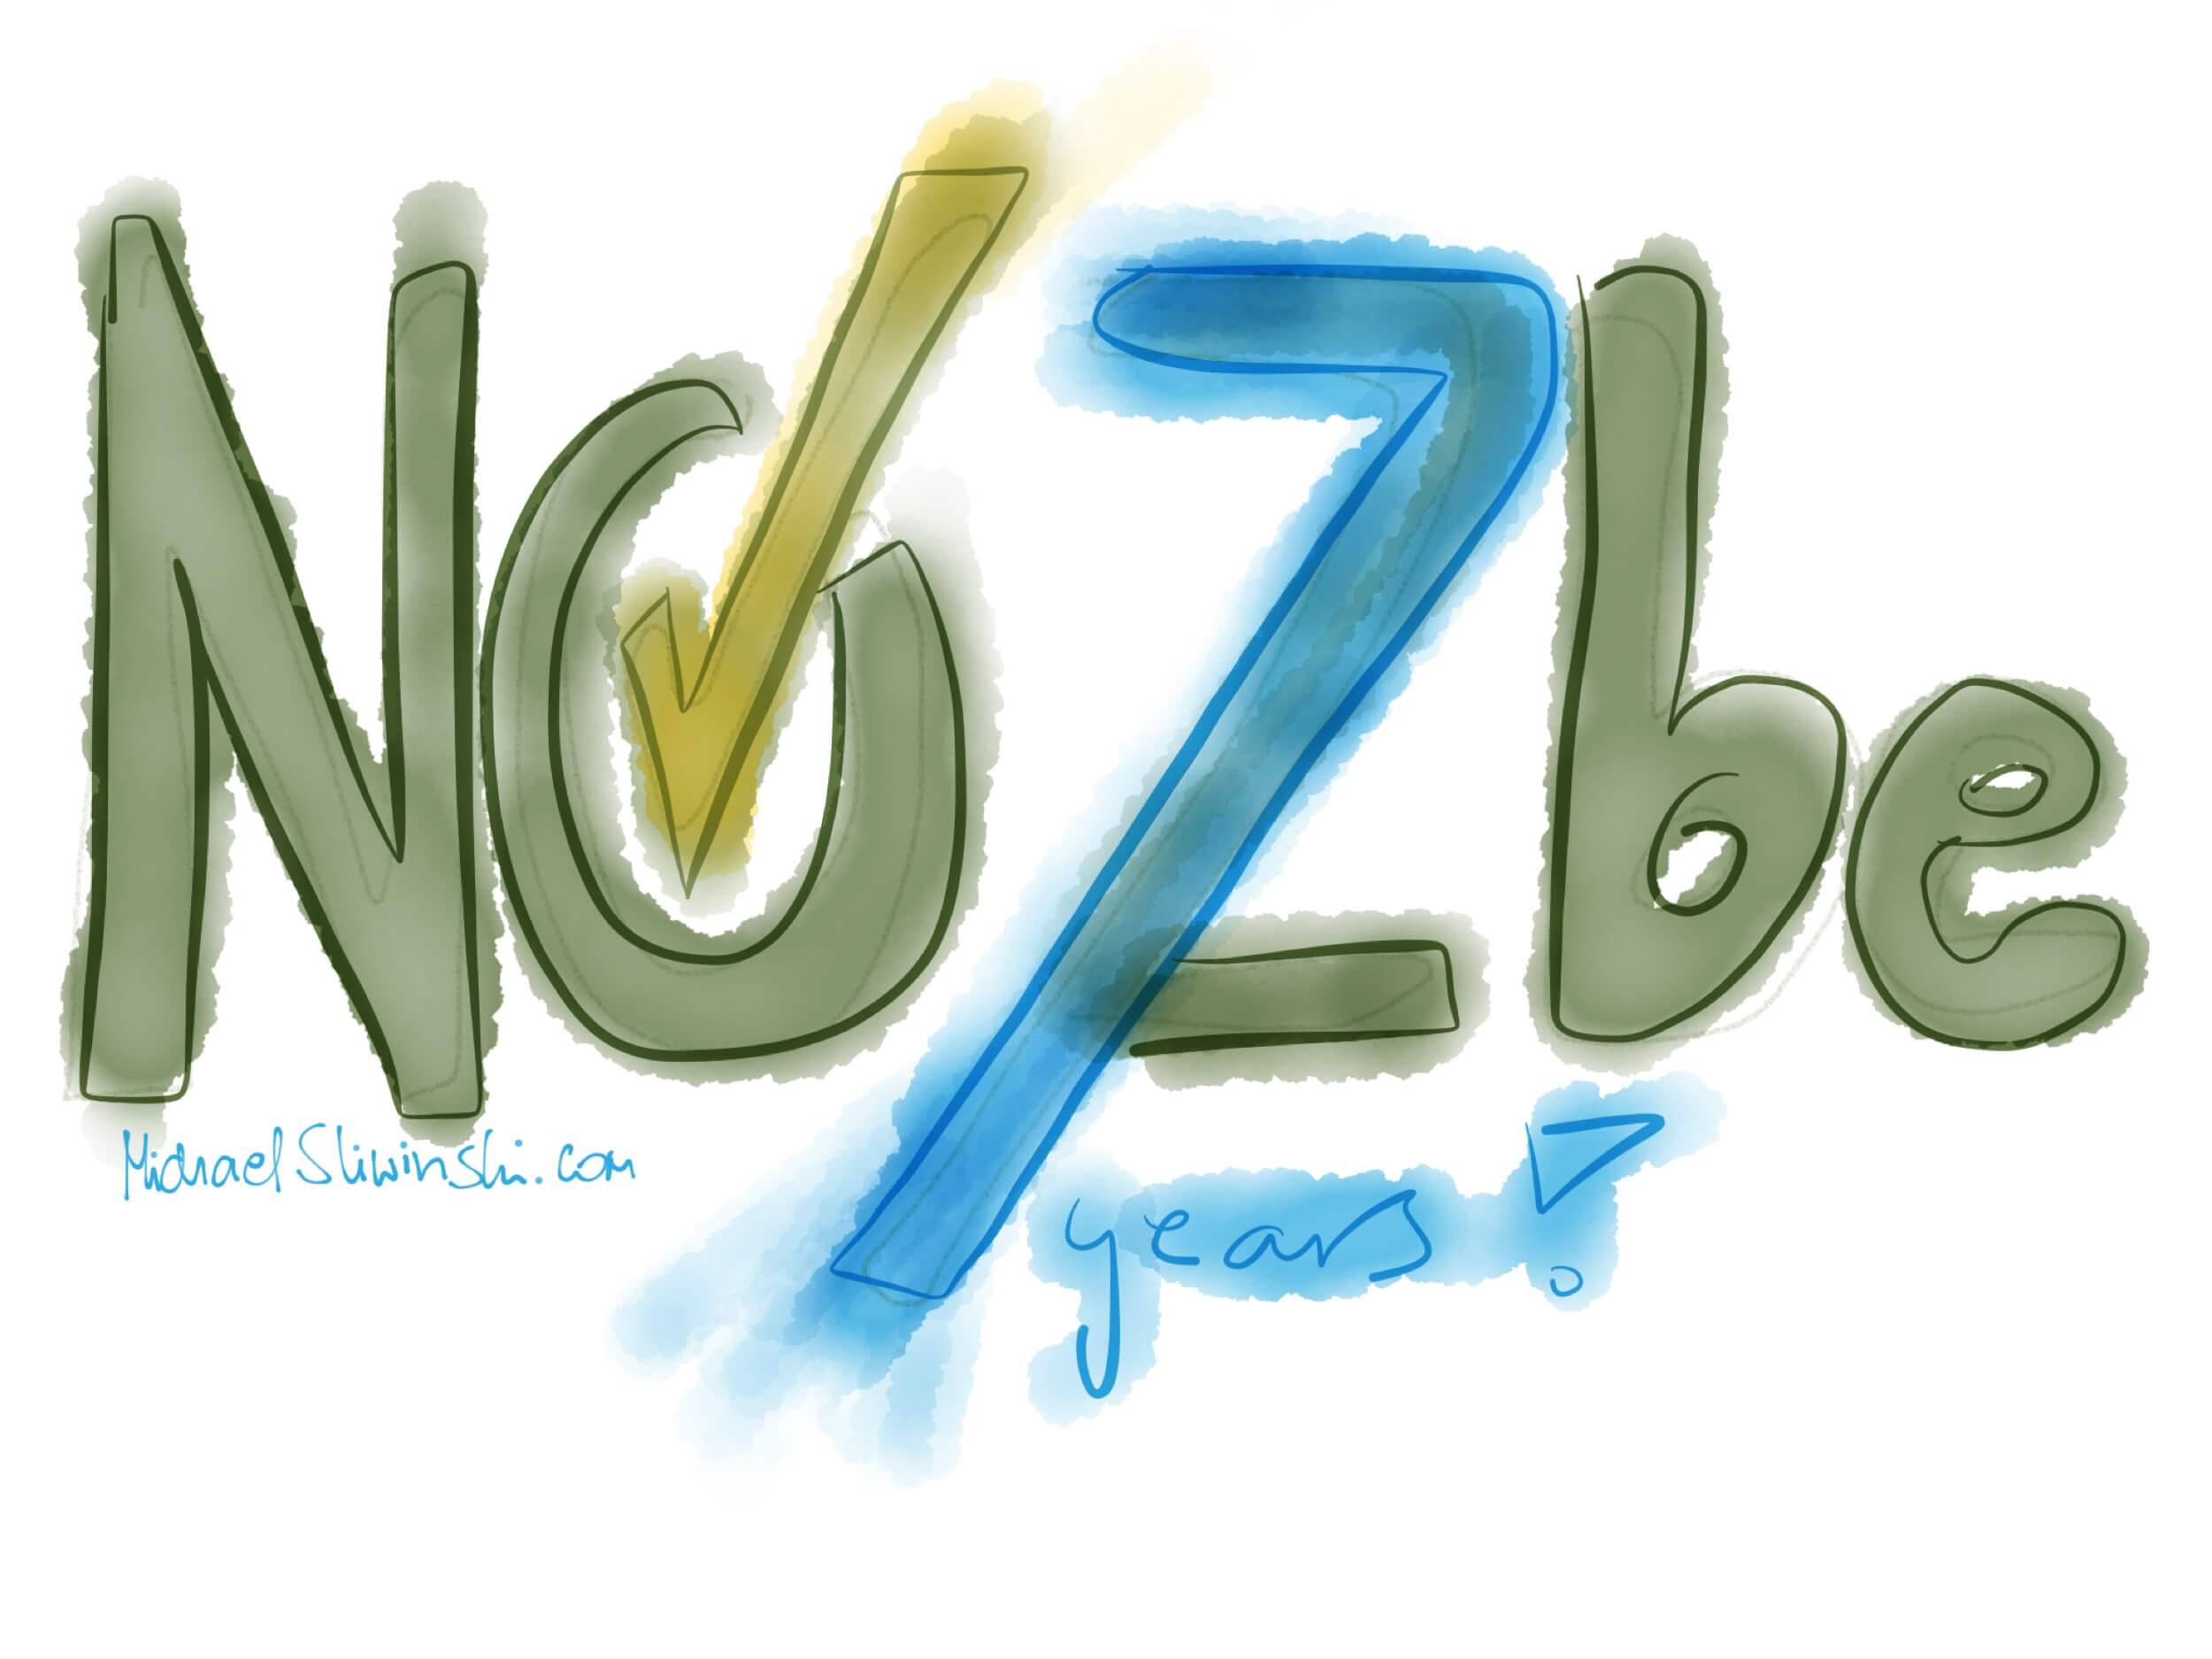 7 years running Nozbe… and just getting started!